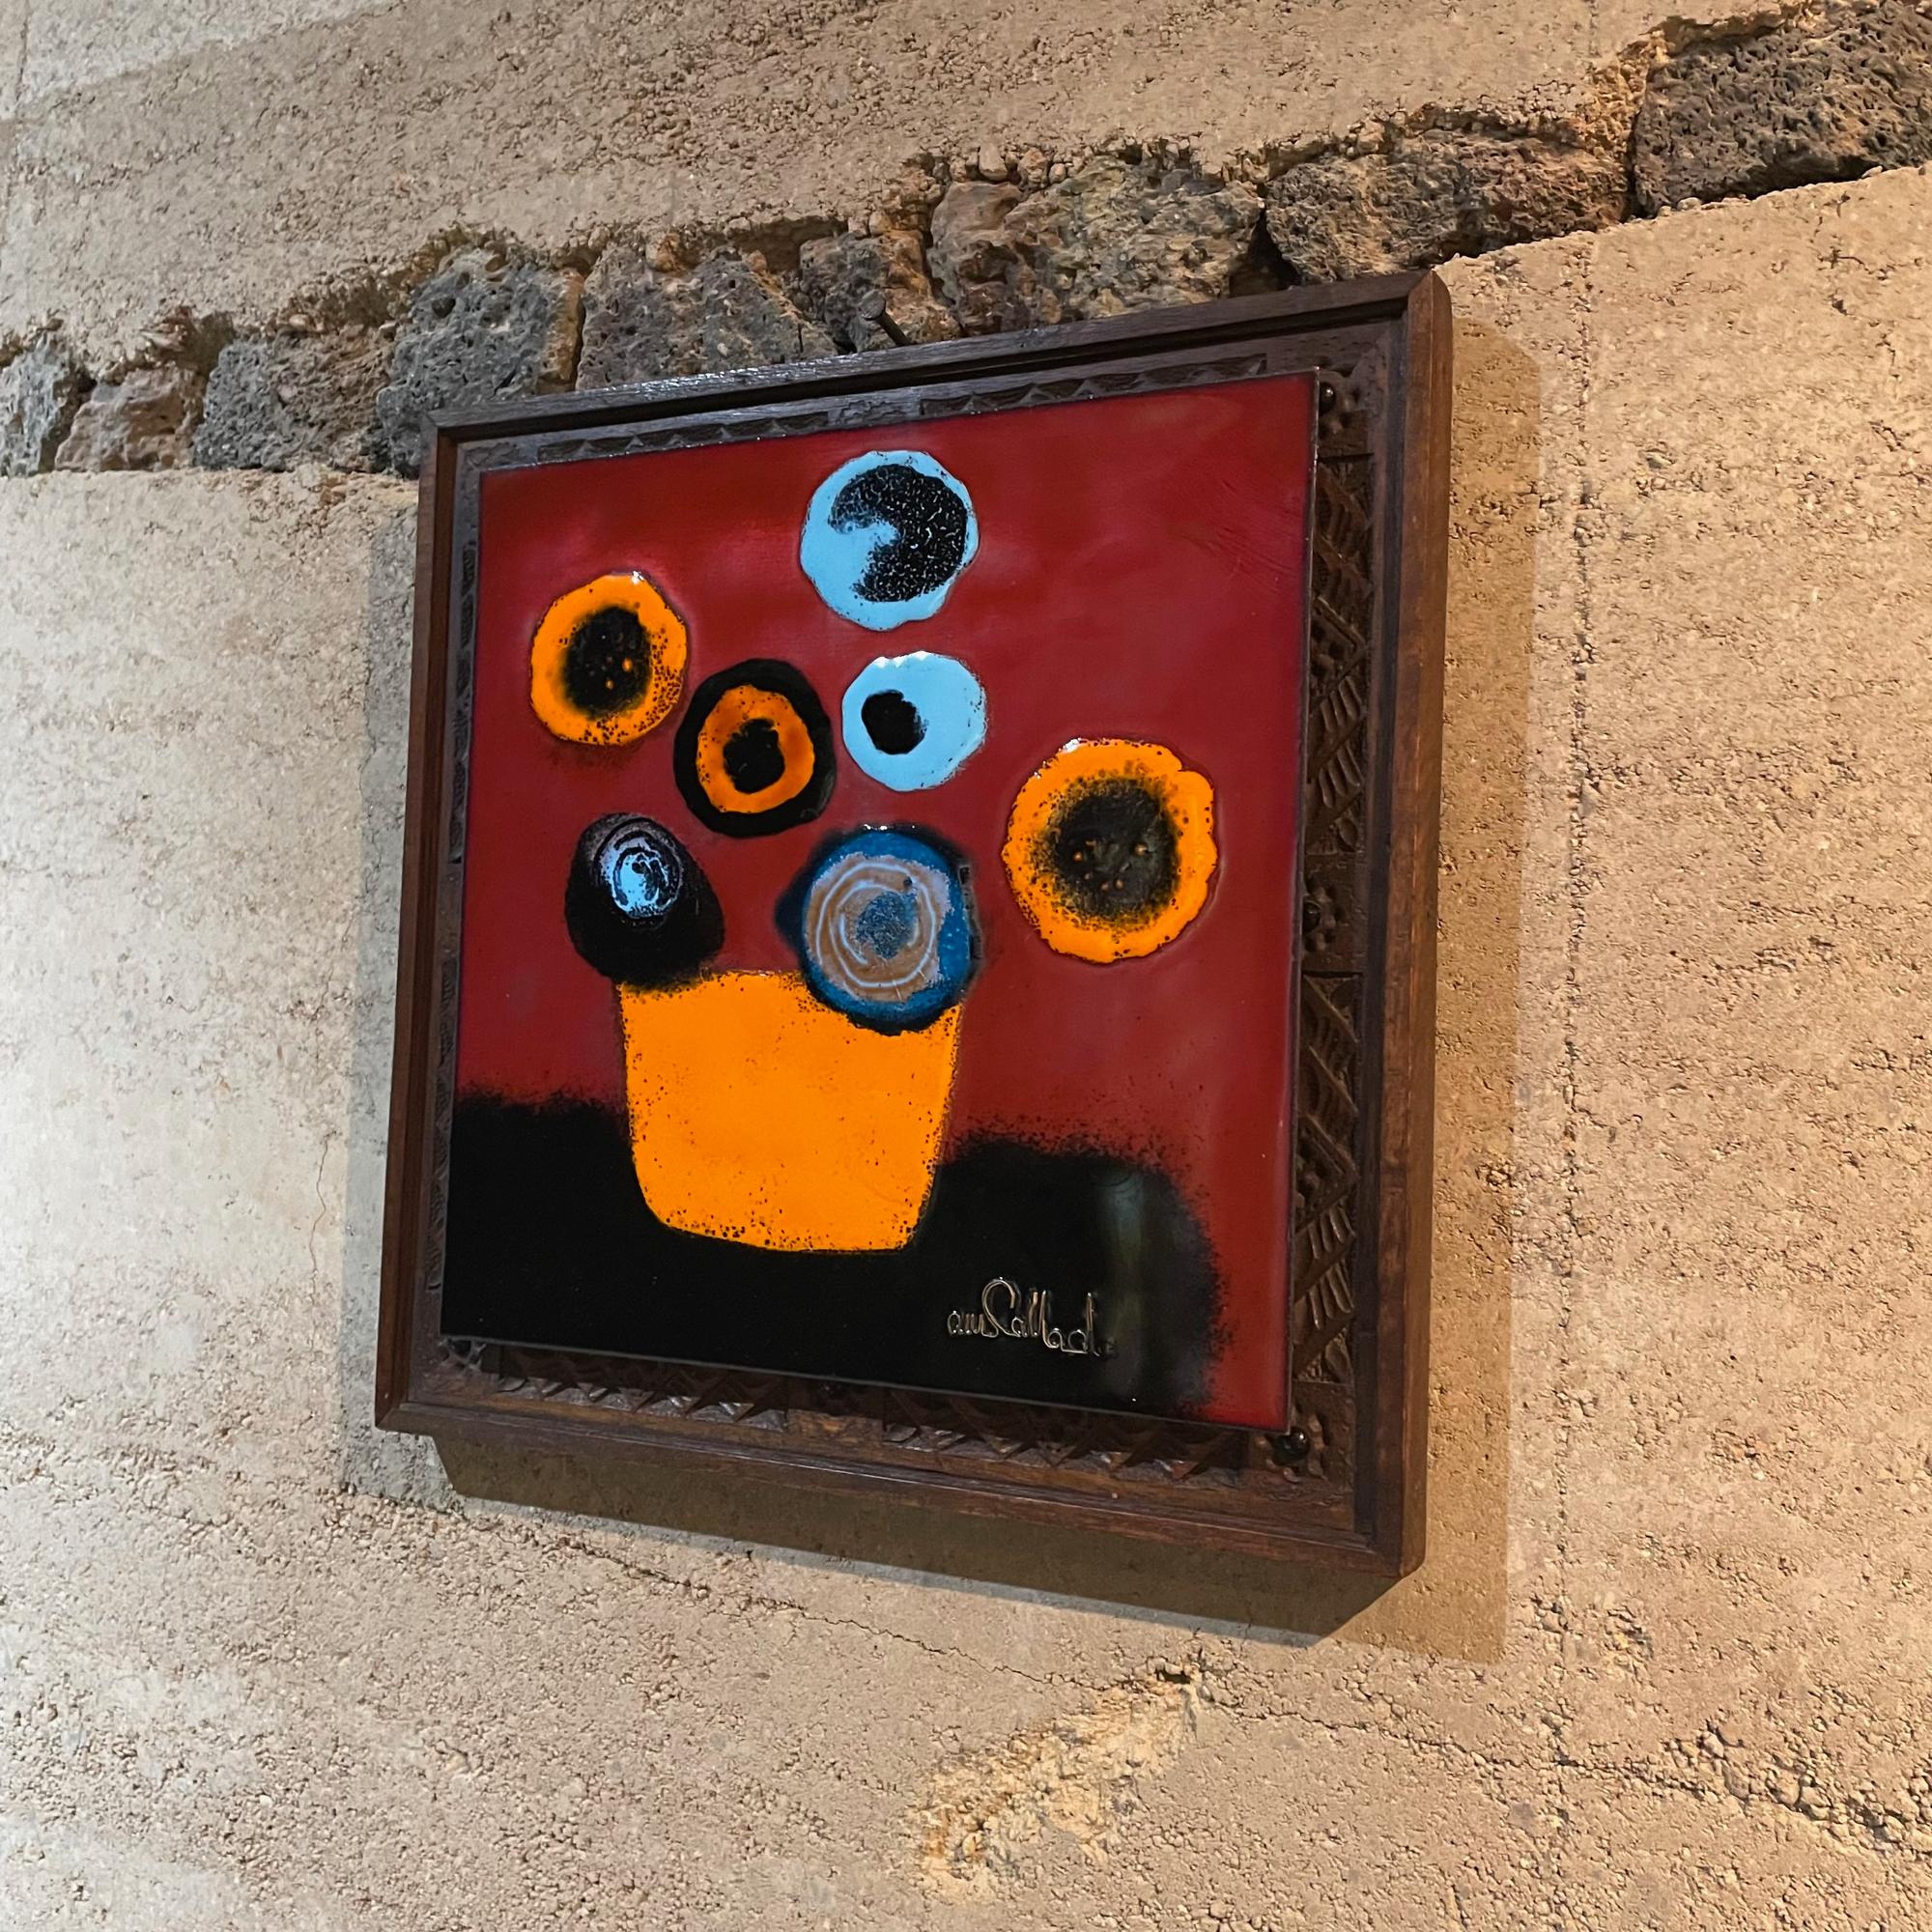 Enamel on copper art. Wood carved frame. Signed lower right corner. Callado. Bright colors. 
Still life flowers in a vase.
Colorful orange blue red.
Measures: 12.5 H x 12.5 H x 1.25 D inches
Unrestored vintage preowned very good